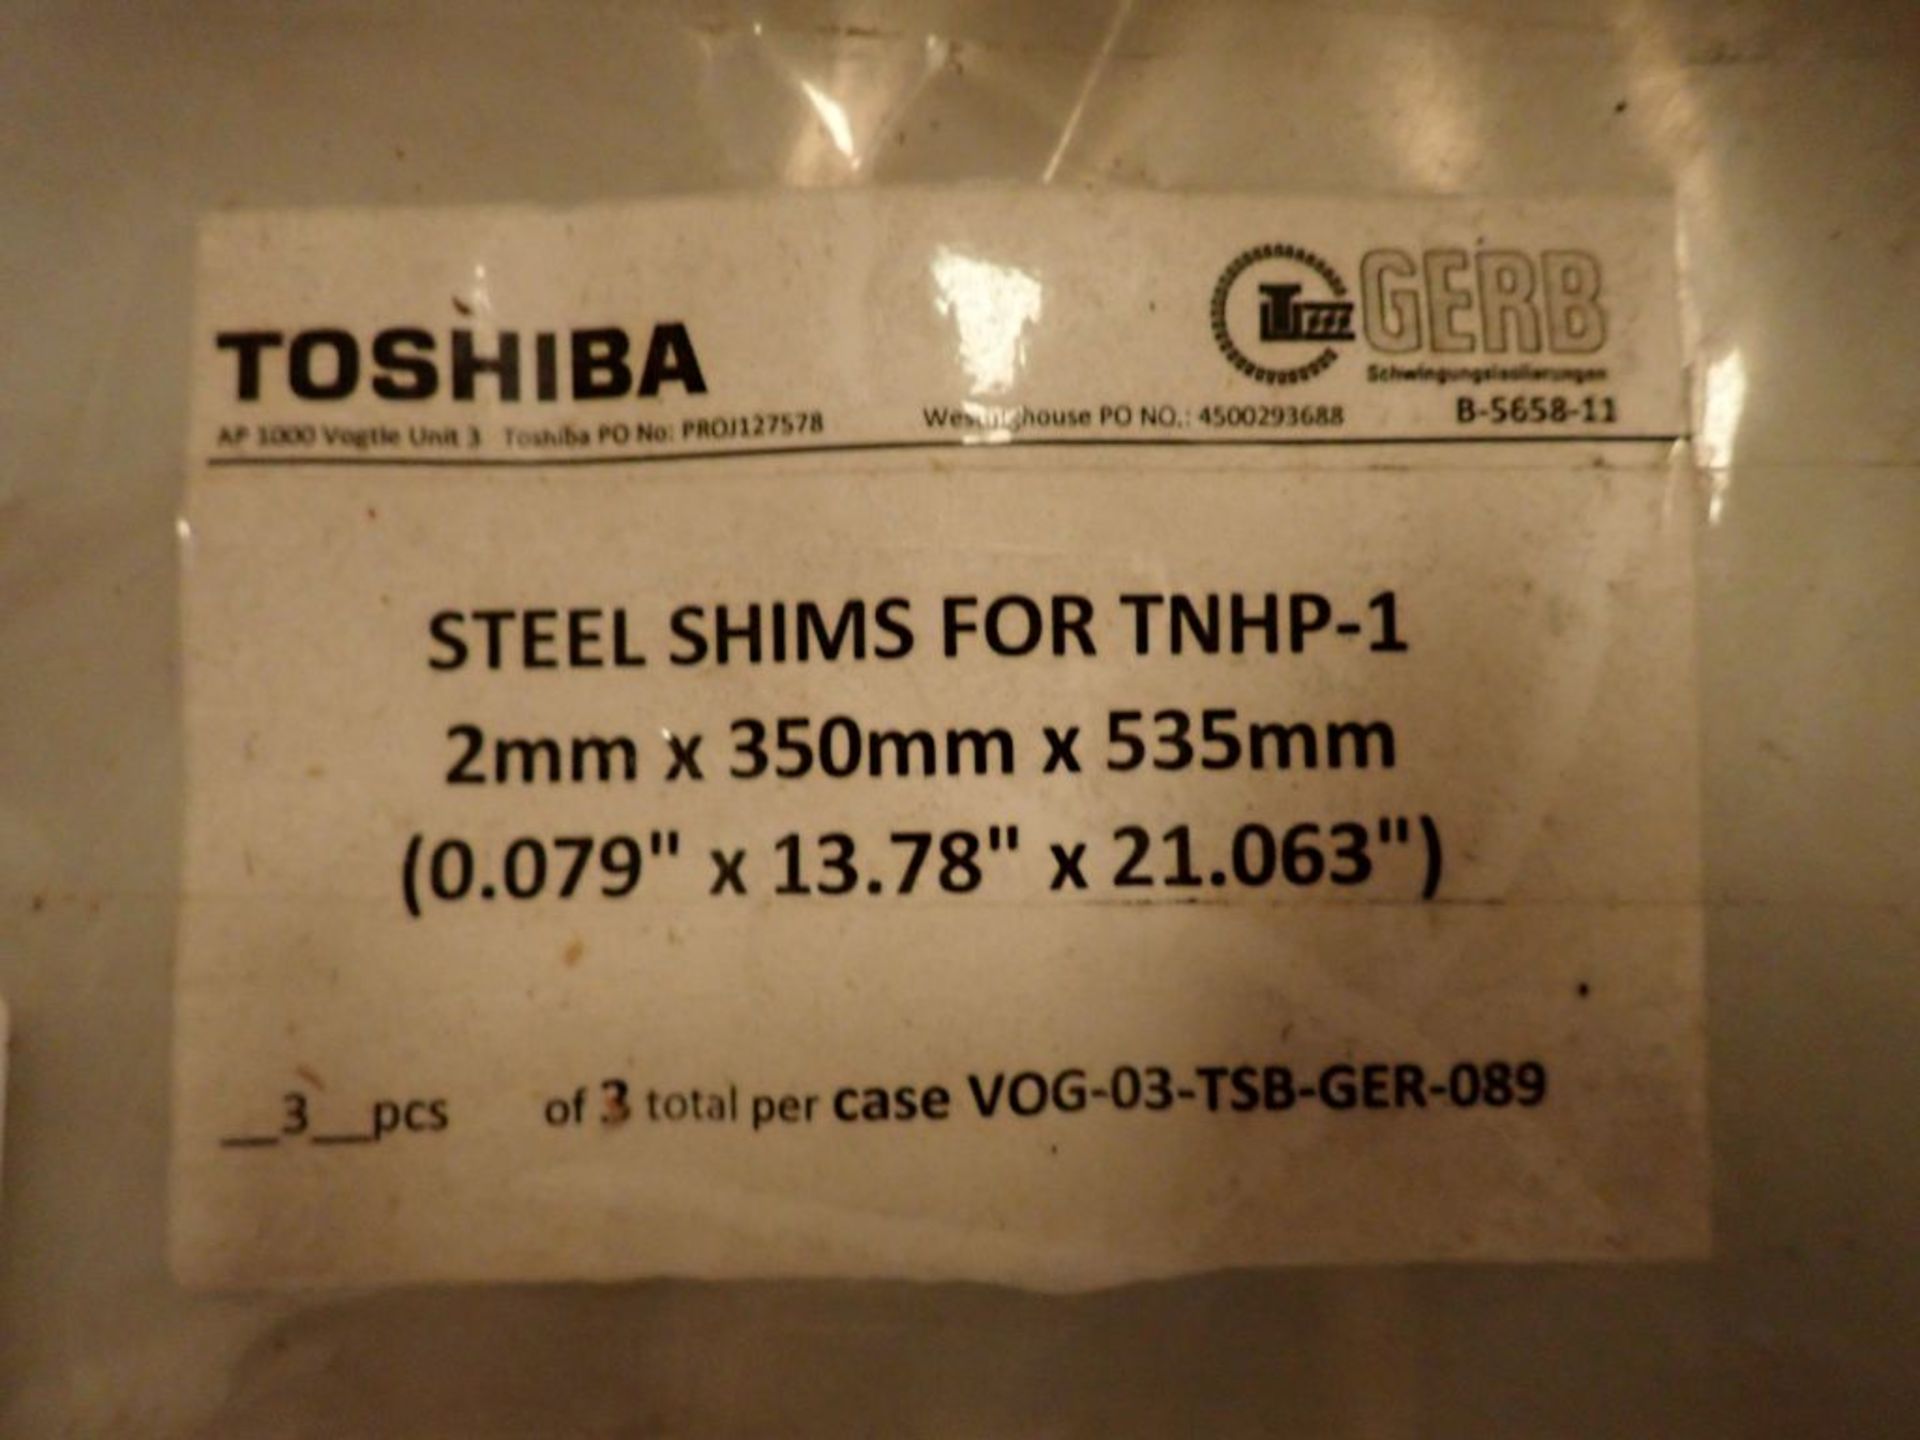 Toshiba Steel Shims for TNHP-1 - 2mm x 350mm x 535mm; Tag: 215088 - Image 4 of 7